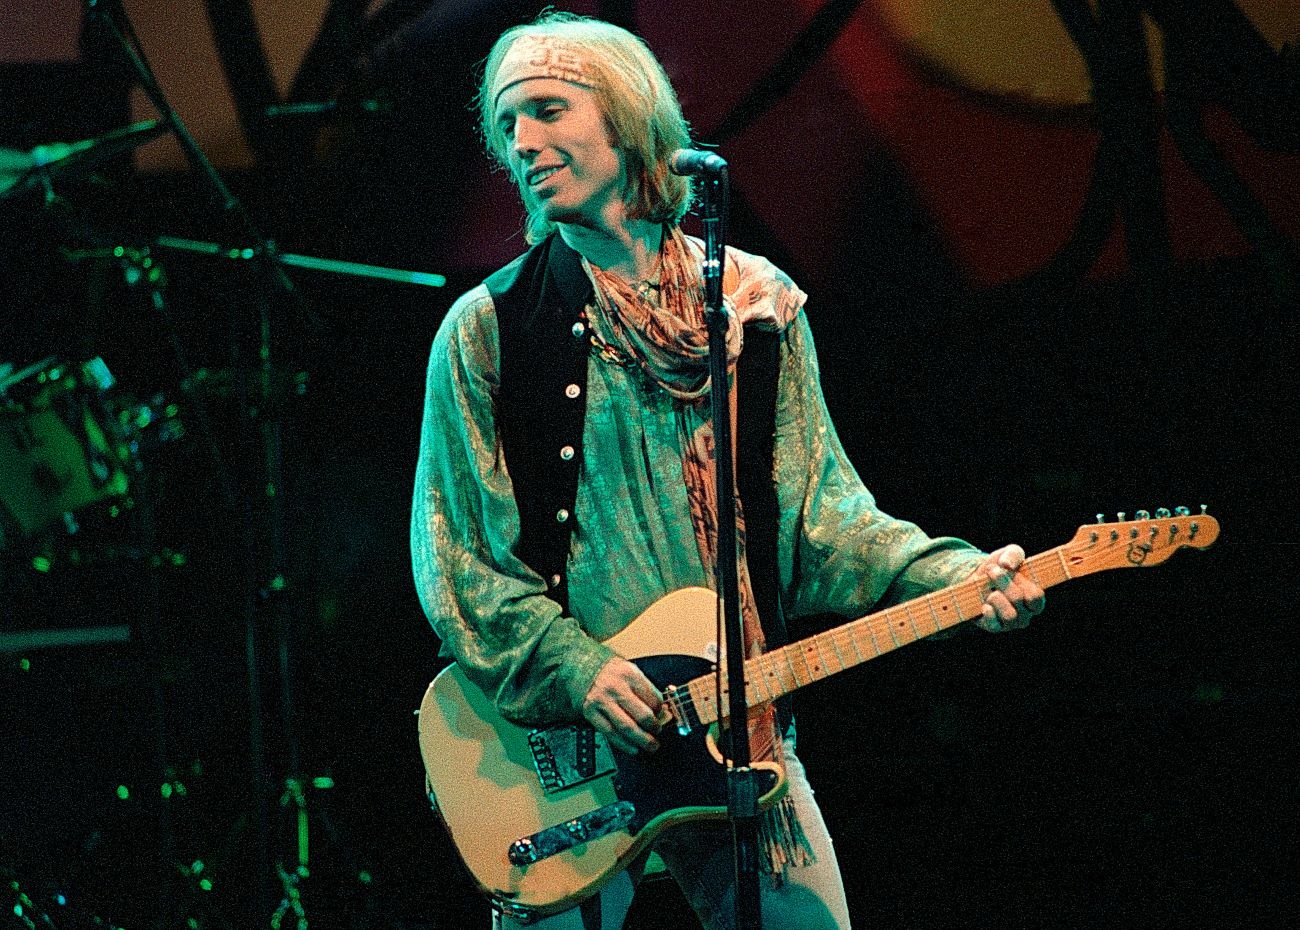 Tom Petty wears a green shirt and plays guitar. He stands in front of a microphone.